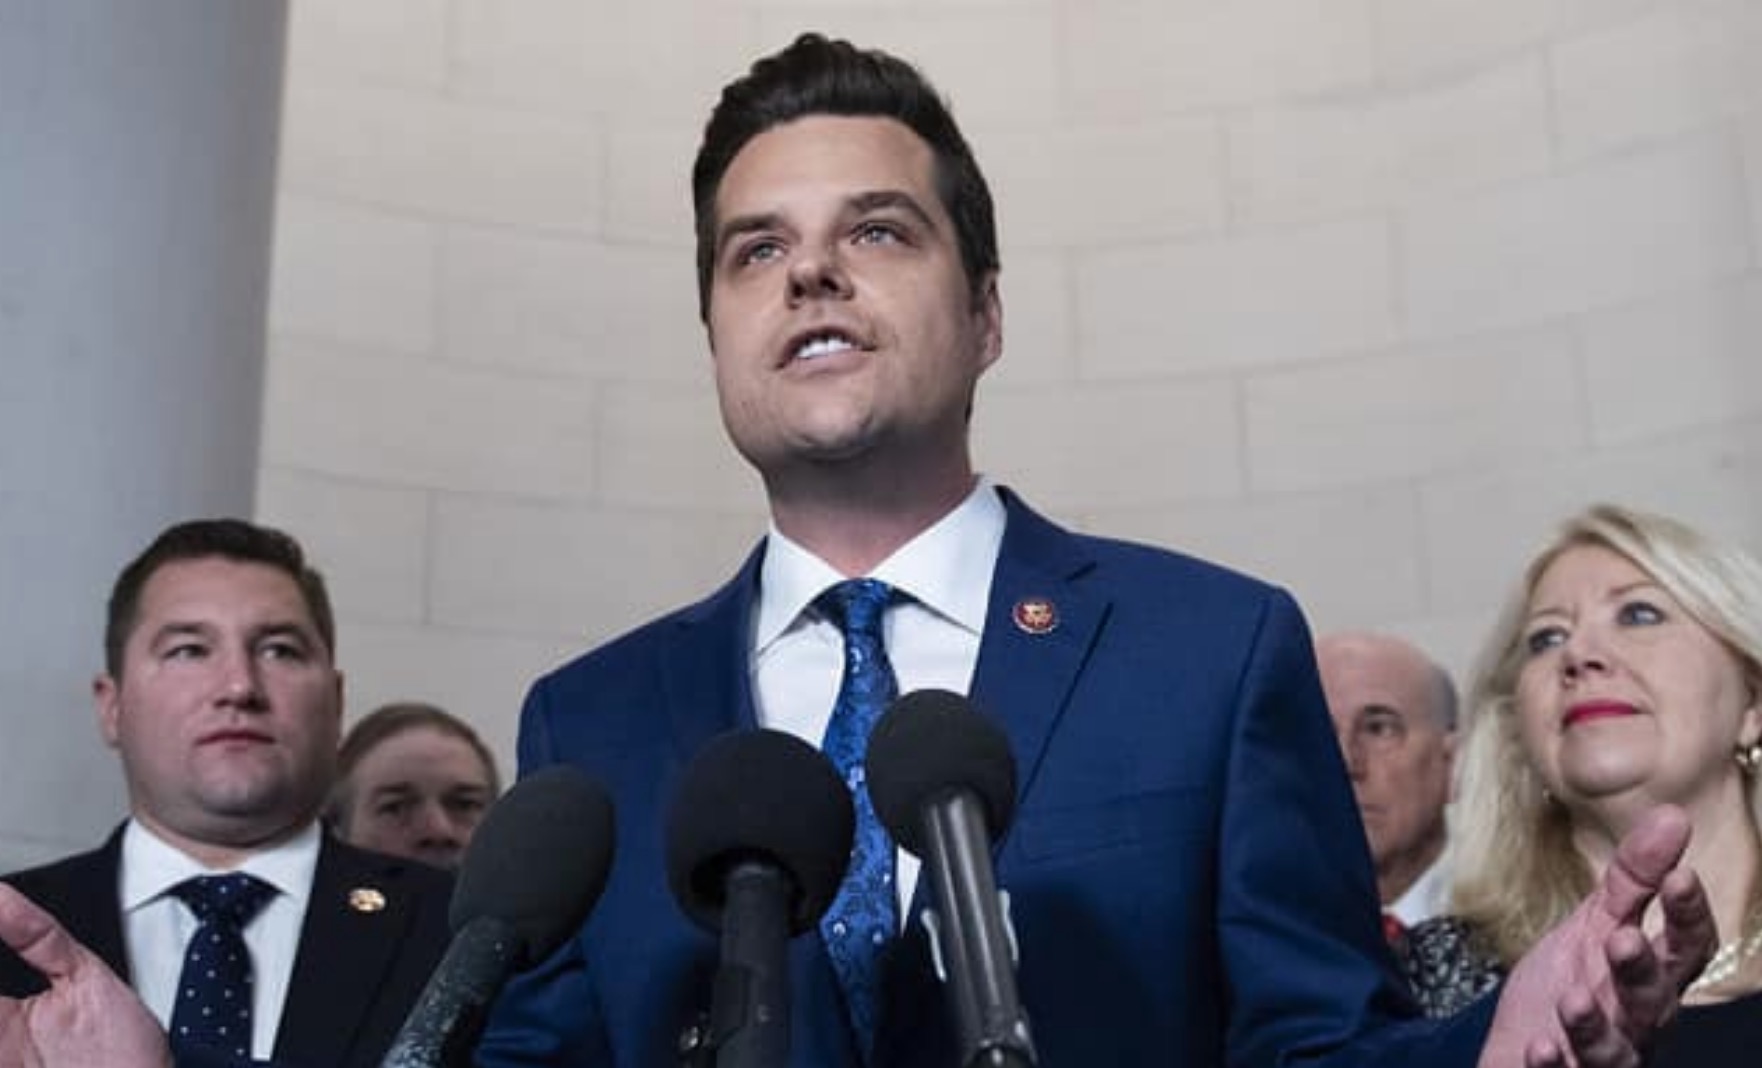 Matt Gaetz Calls for Evidence of Twitter Collusion to be Released